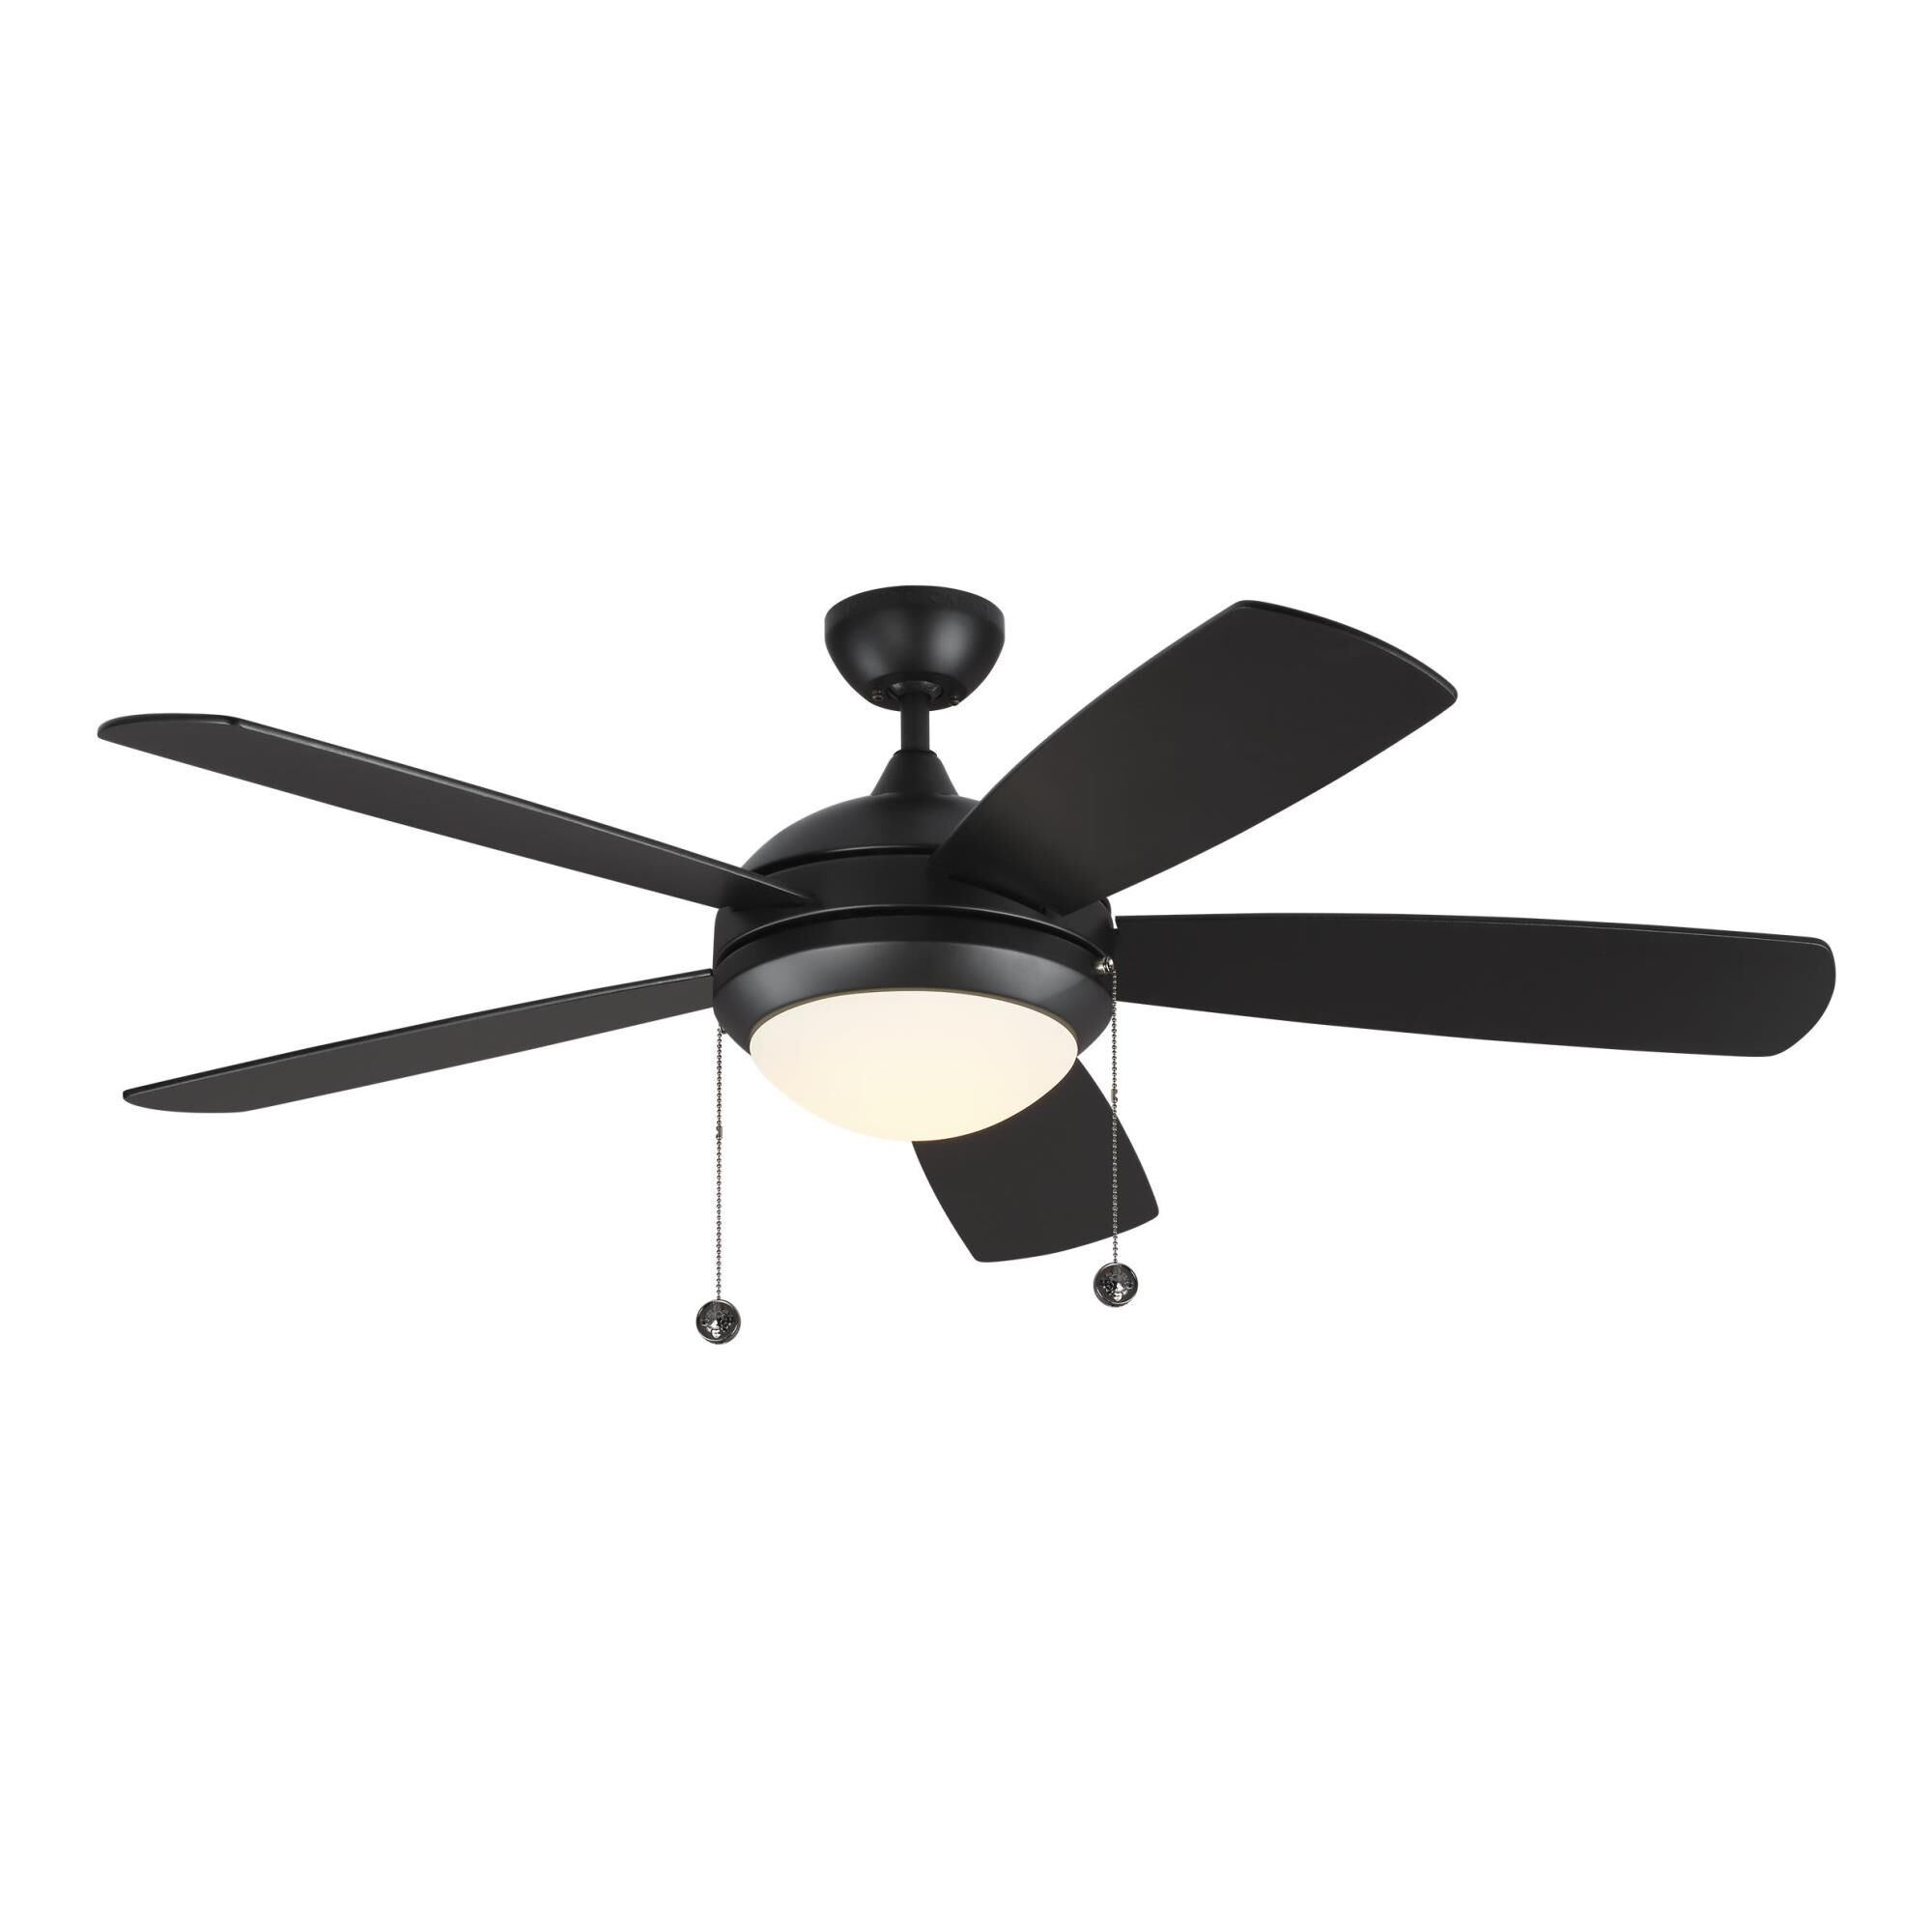 Photos - Fan Generation Lighting Discus Classic 52 Inch Ceiling  with Light Kit Disc